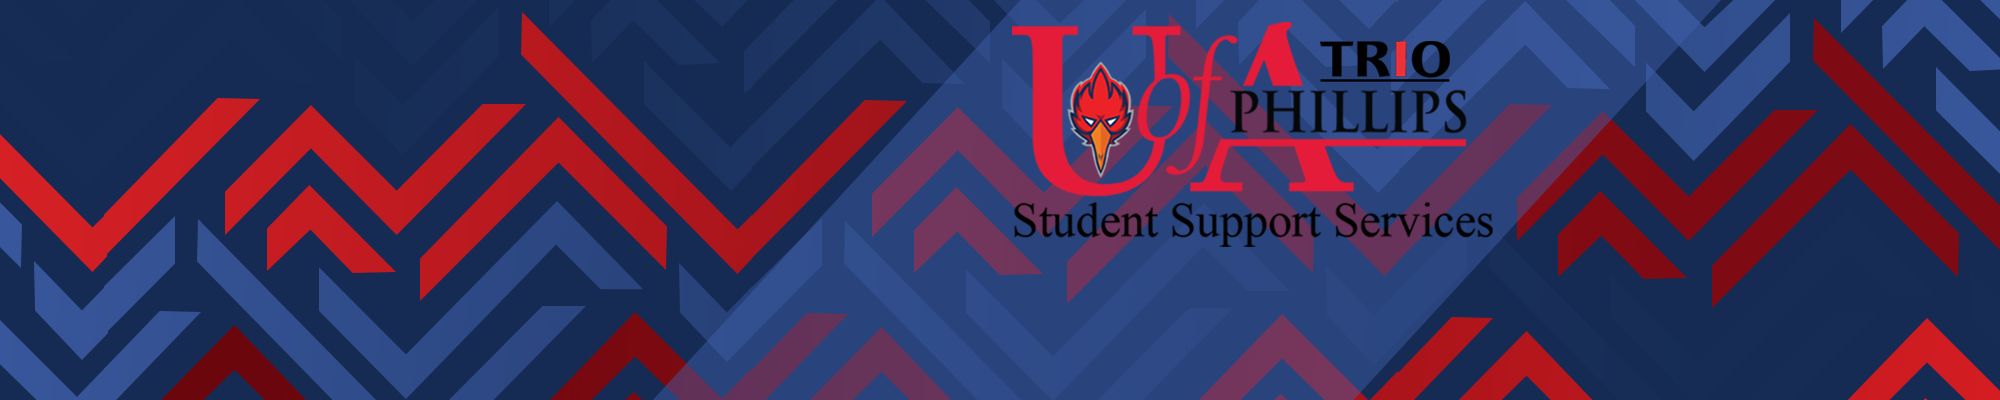 Student Support Services / Trio Your Success is Our Goal